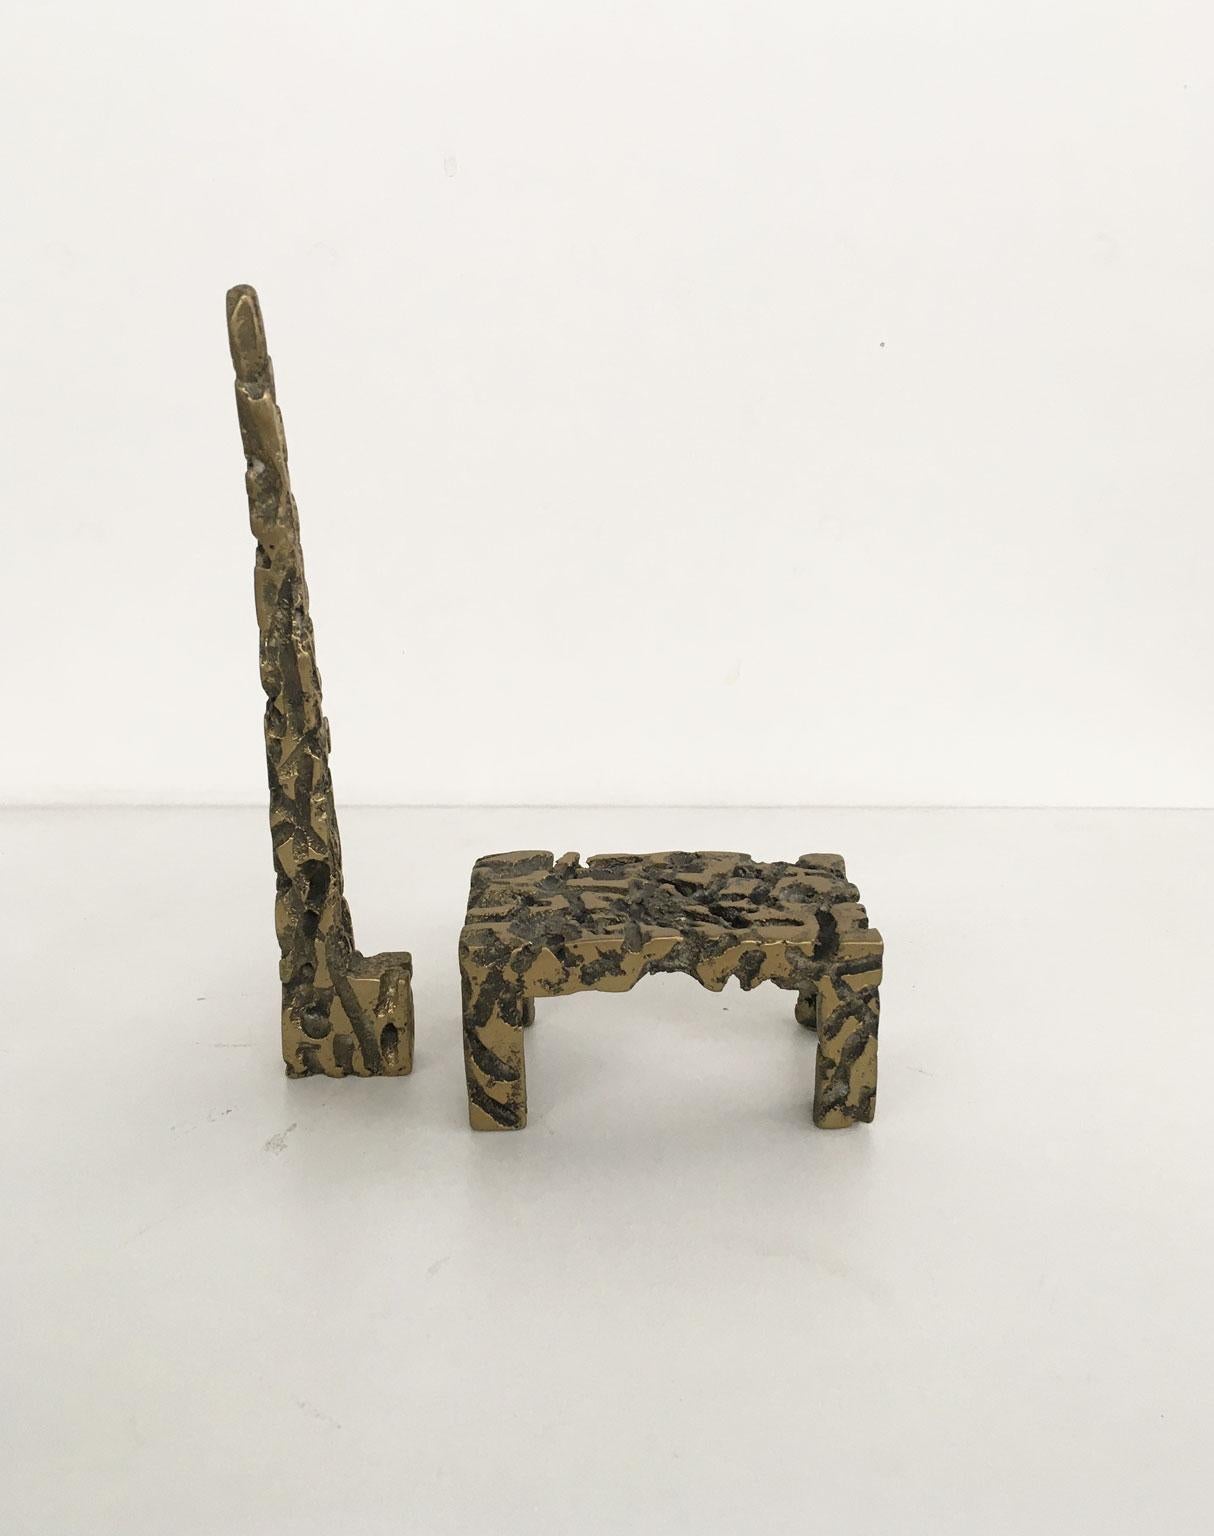 Urano Palma is an Italian artist who starts to create his artworks following the philosophy of Lucio Fontana.
He specially worked to the sculptured furniture, inventing a casting technique to obtain the perforated solid metal.
The chair is separated